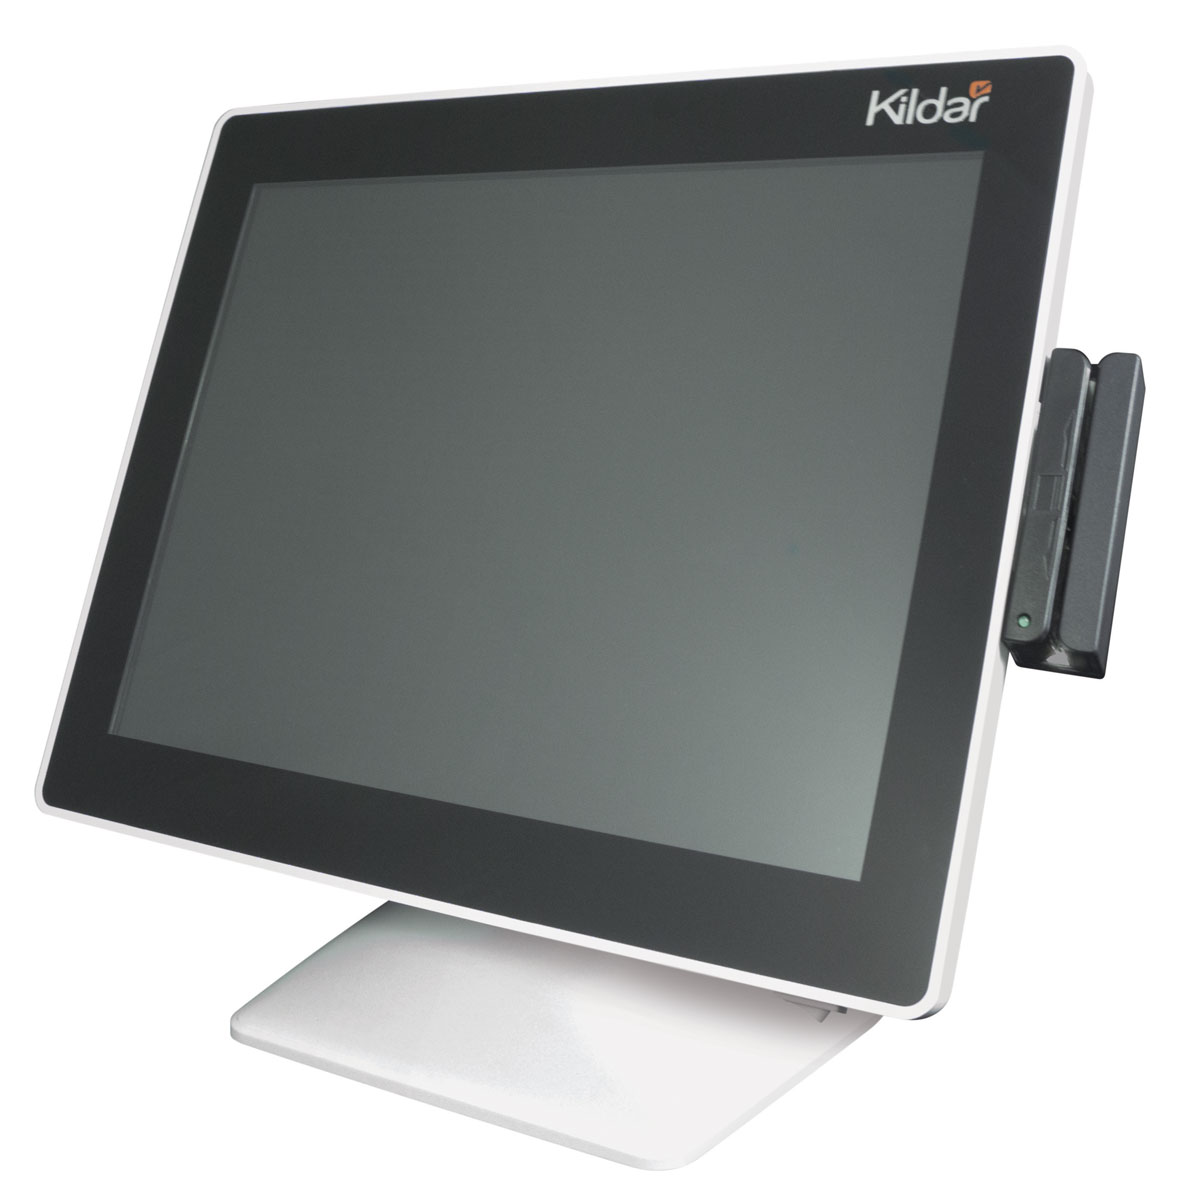 Kildar POS Touch screen Terminals DataTouch T1580